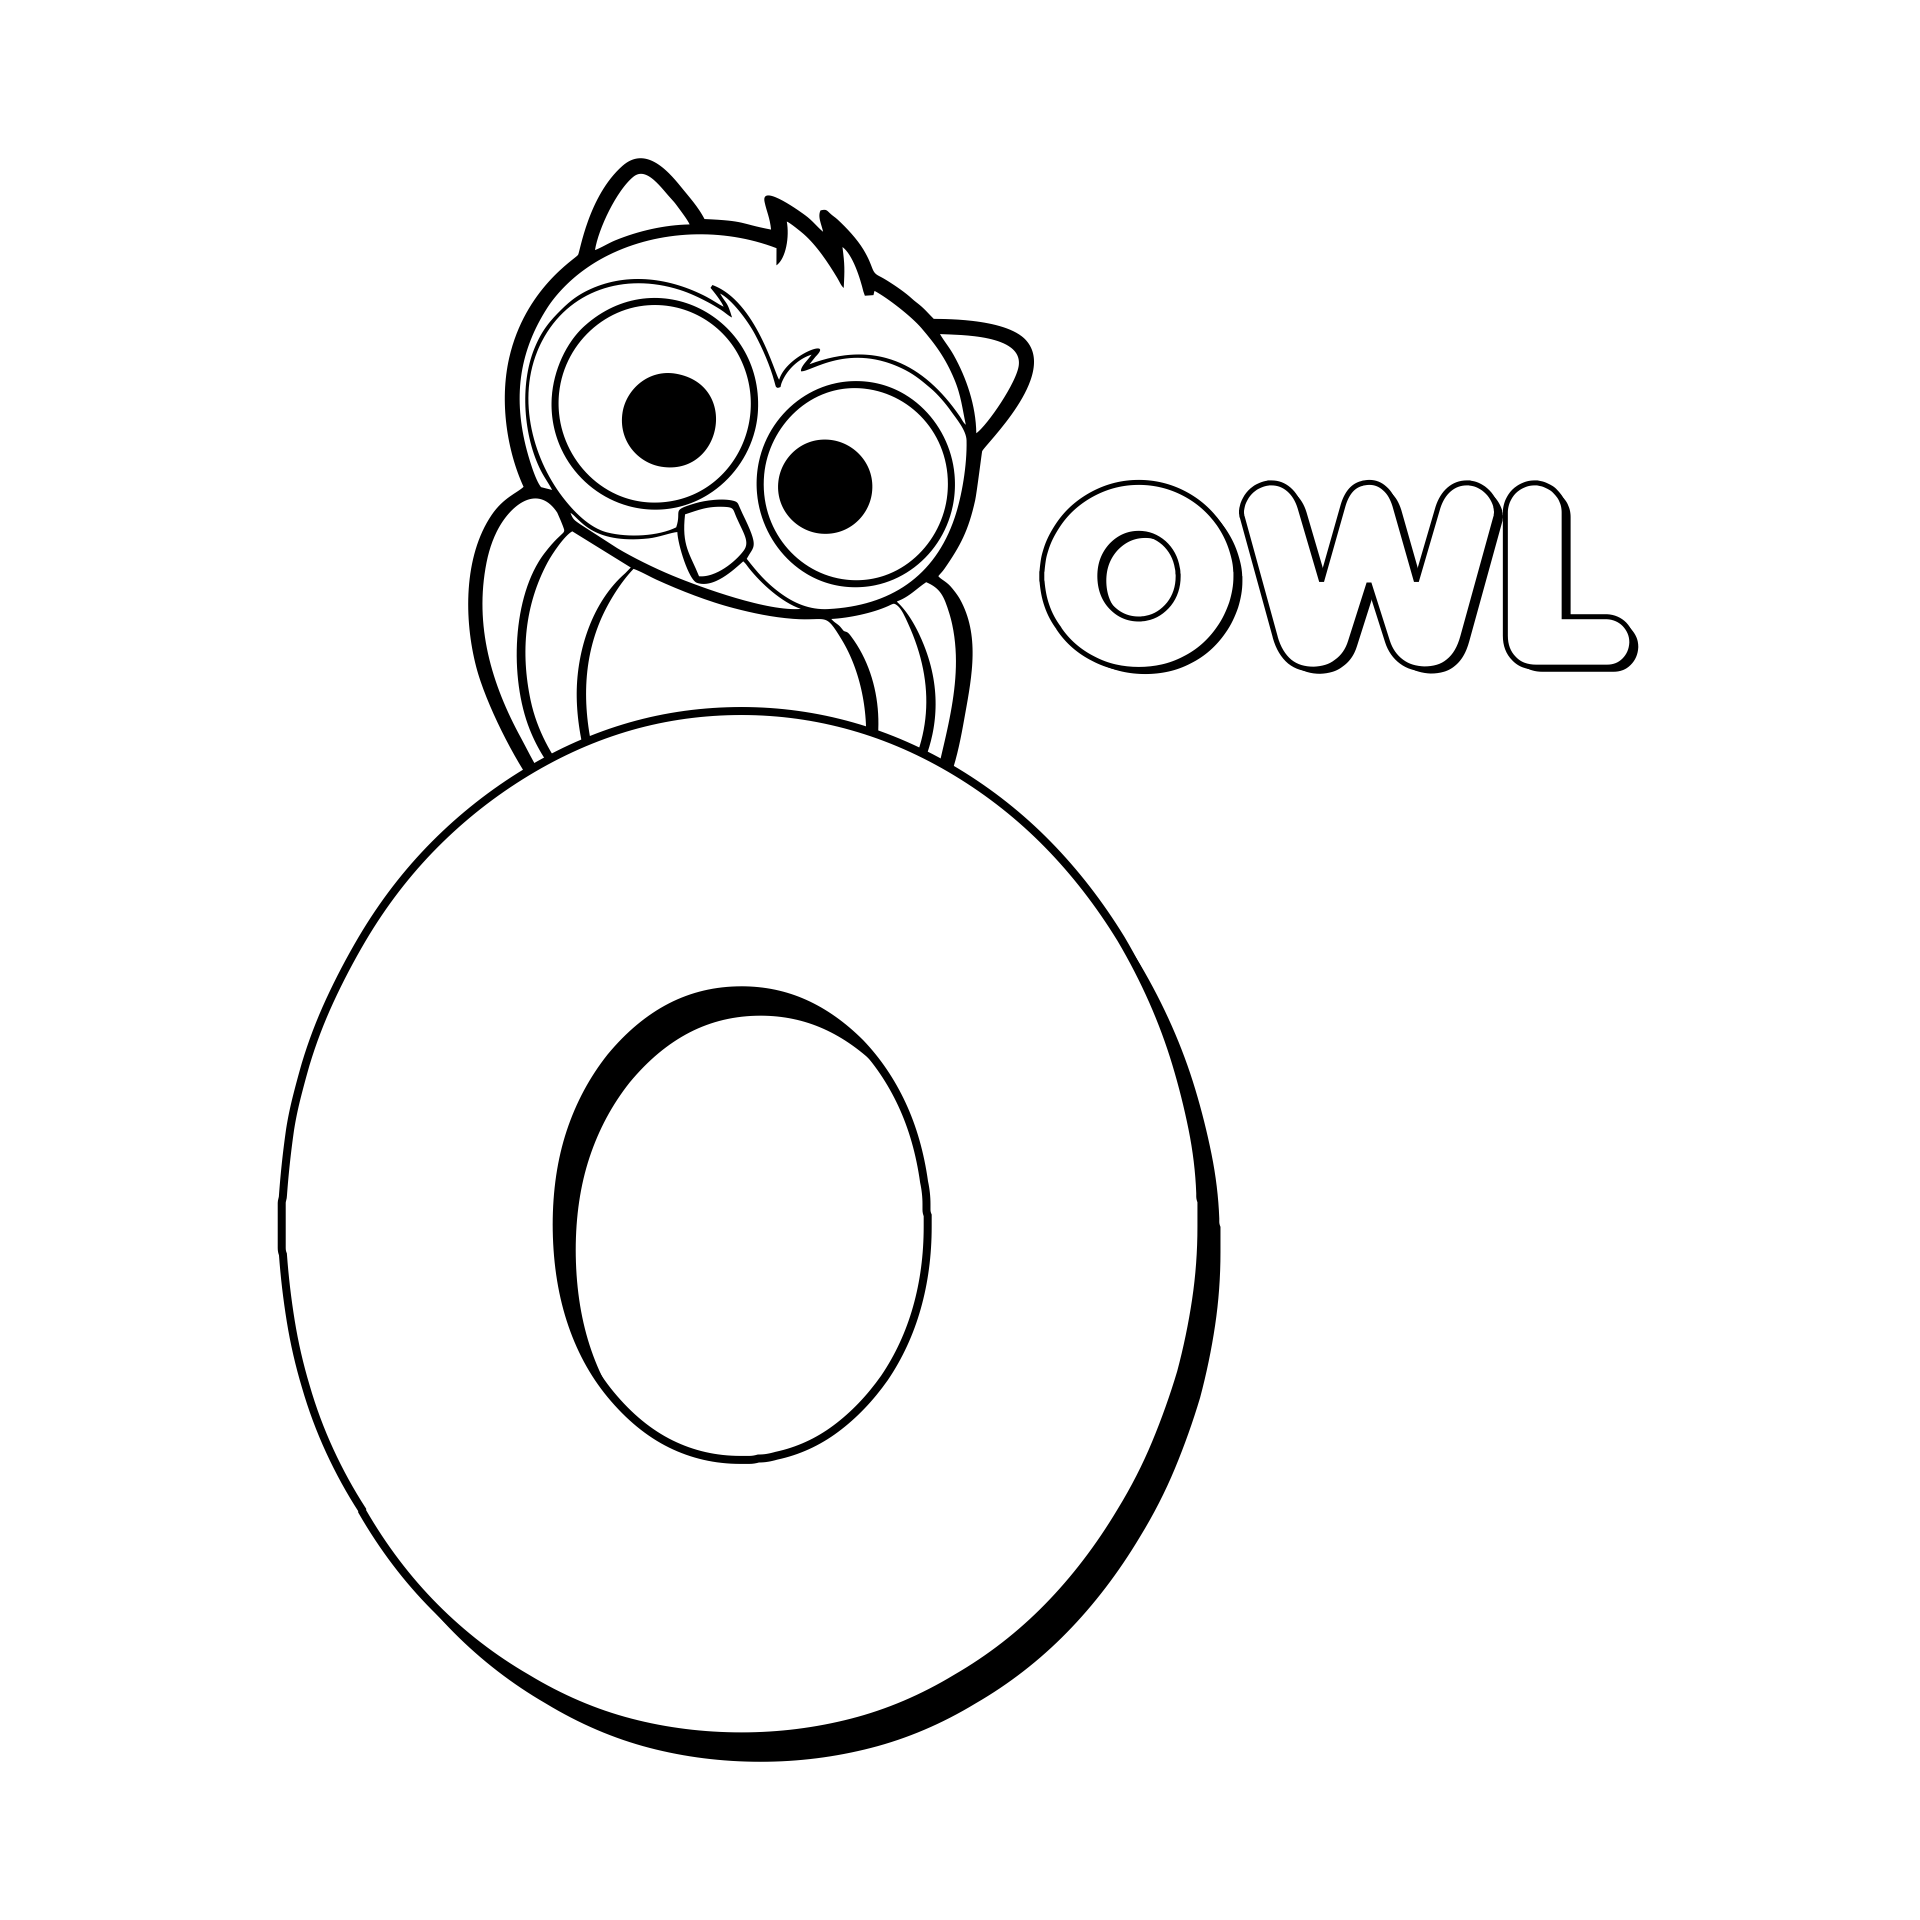 Letter O Coloring Pages